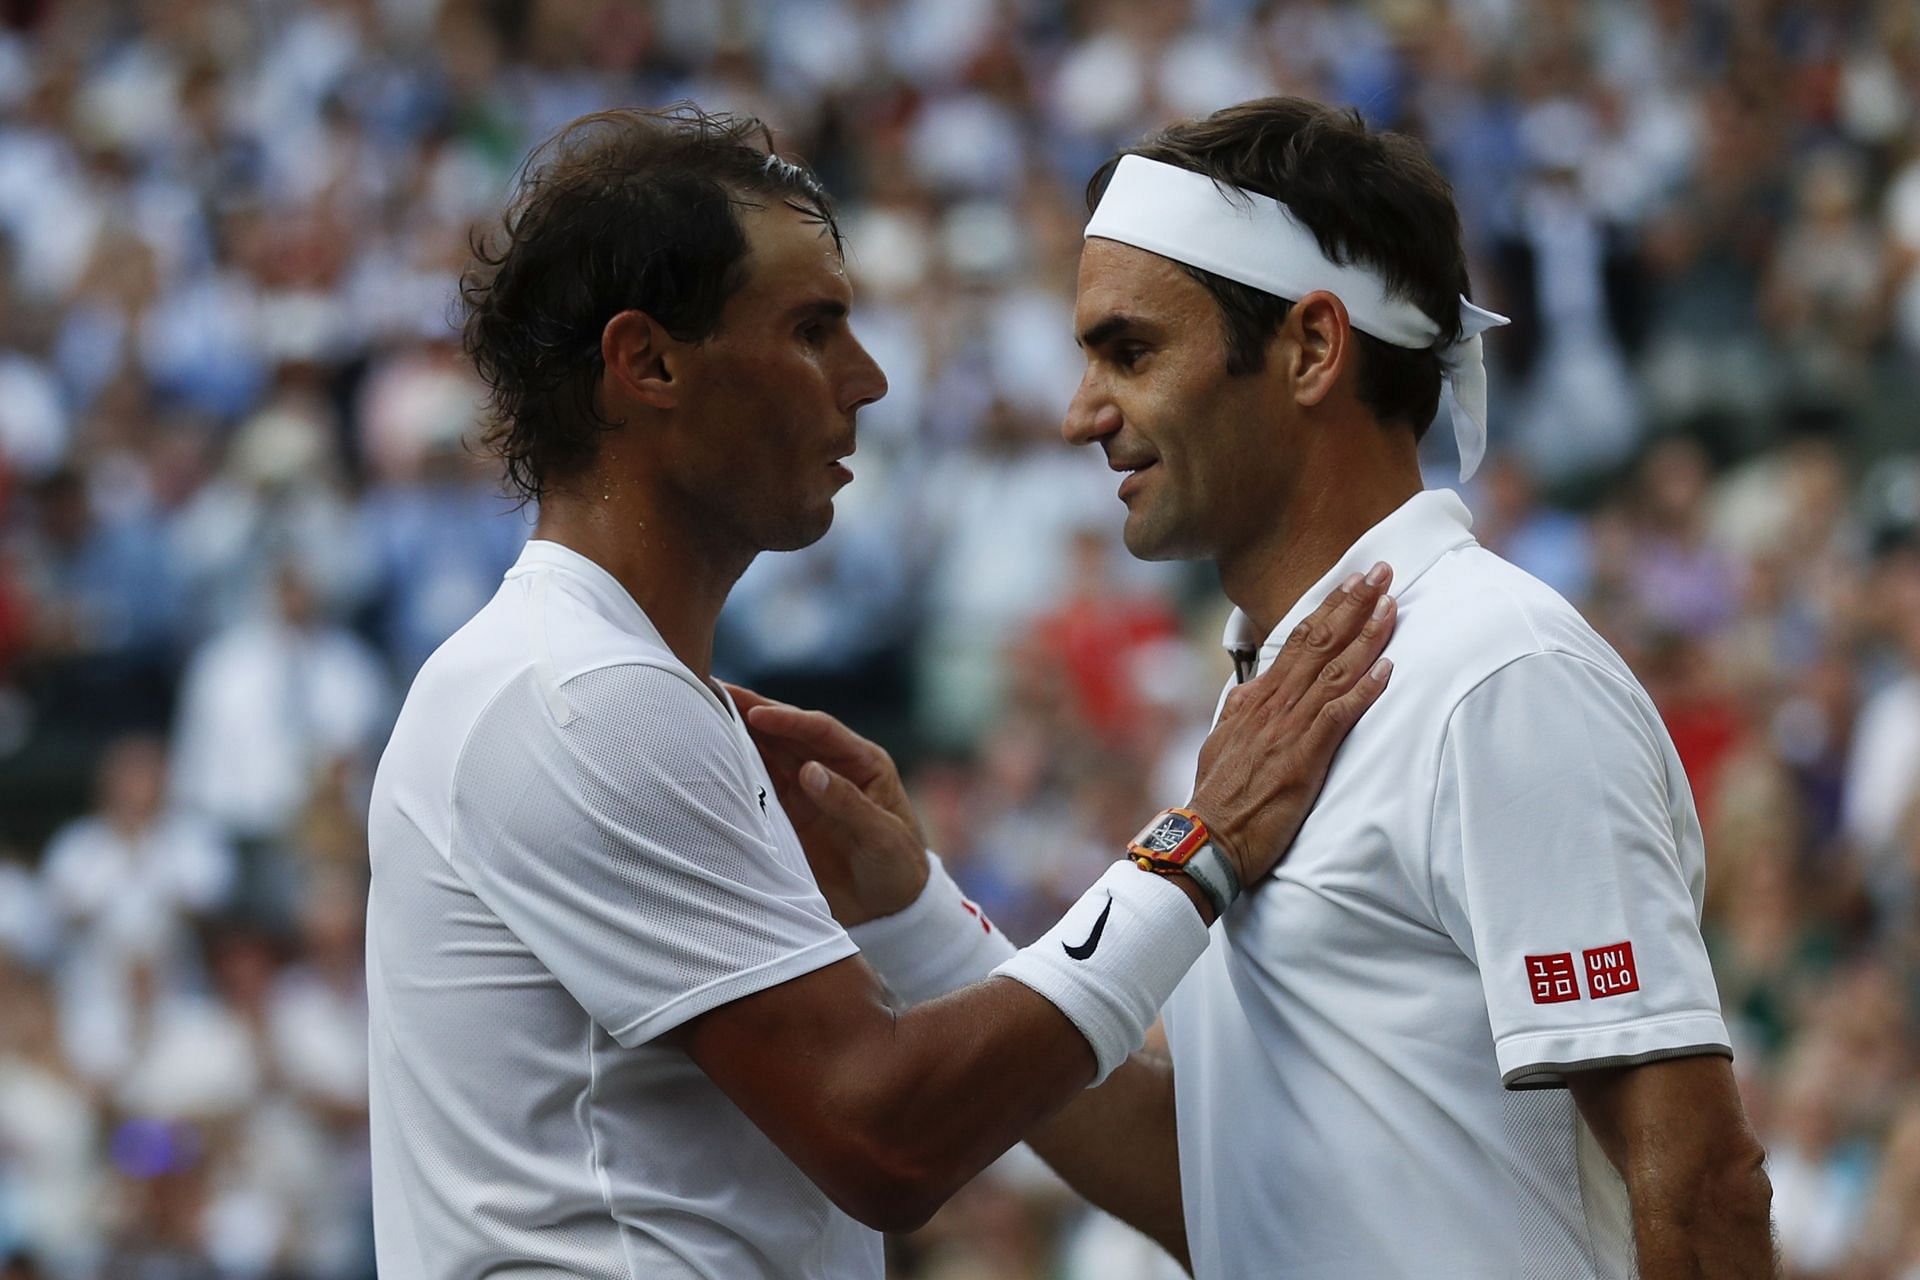 Rafael Nadal congratulates Roger Federer after their match at the 2019 Wimbledon Championships